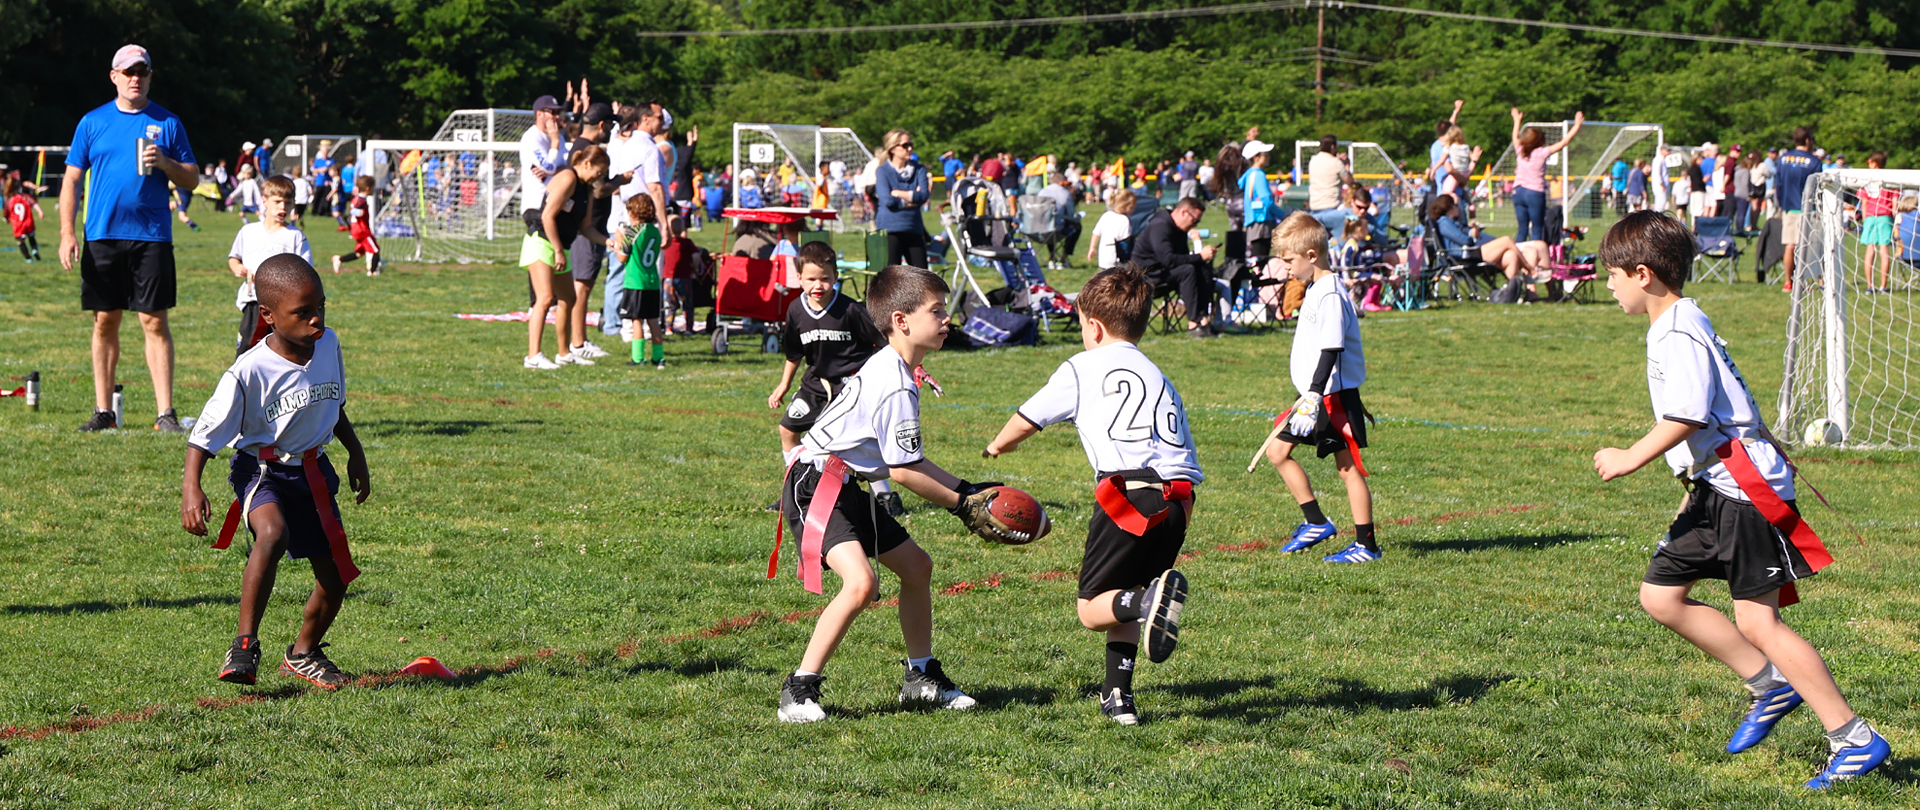 CHAMP Flag Football
Now offering leagues for ages 6–18
 
